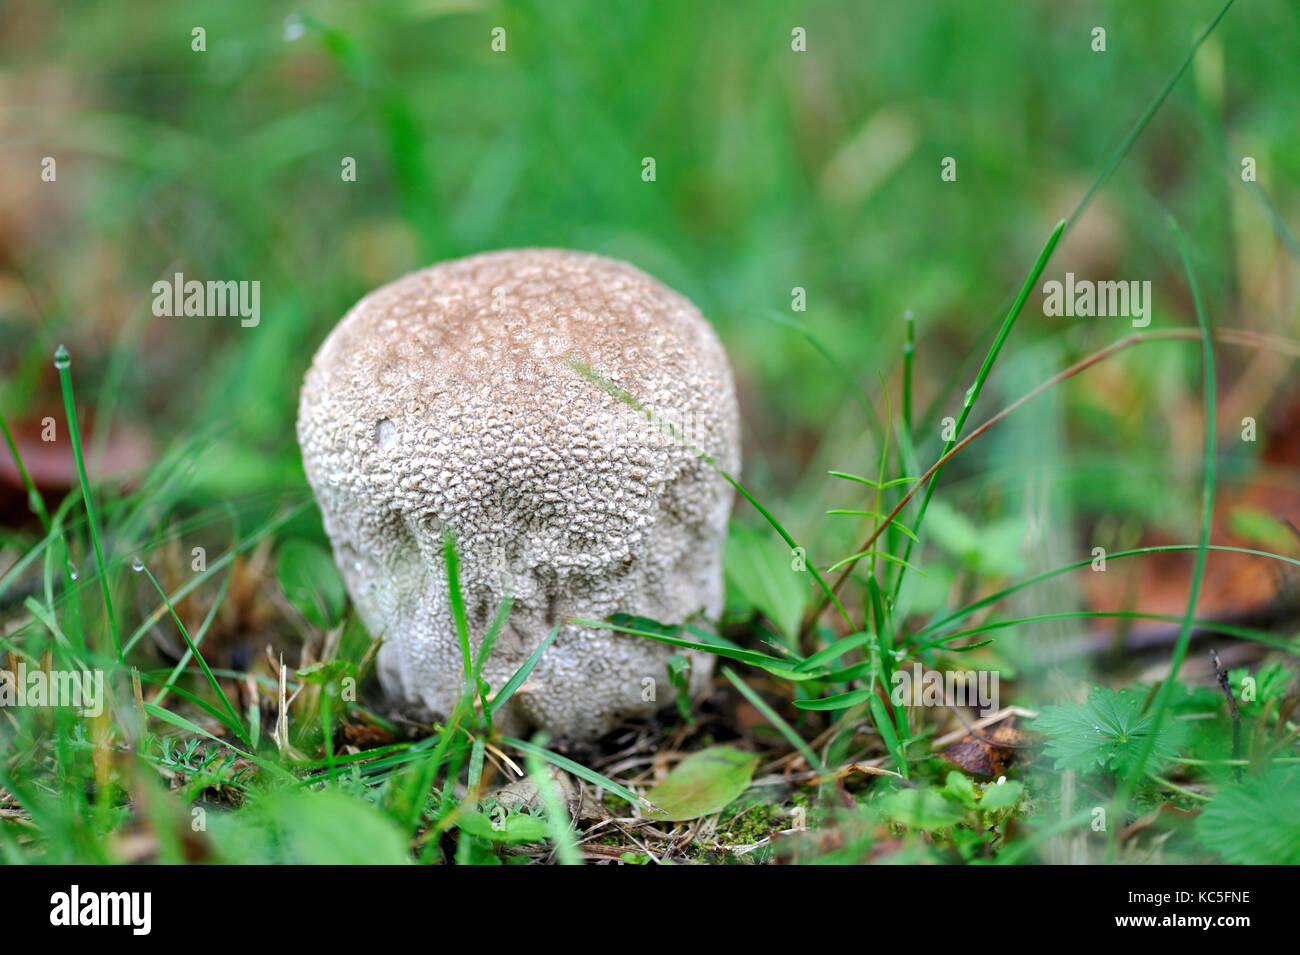 Mushroom raincoat growing in the forest in autumn Stock Photo